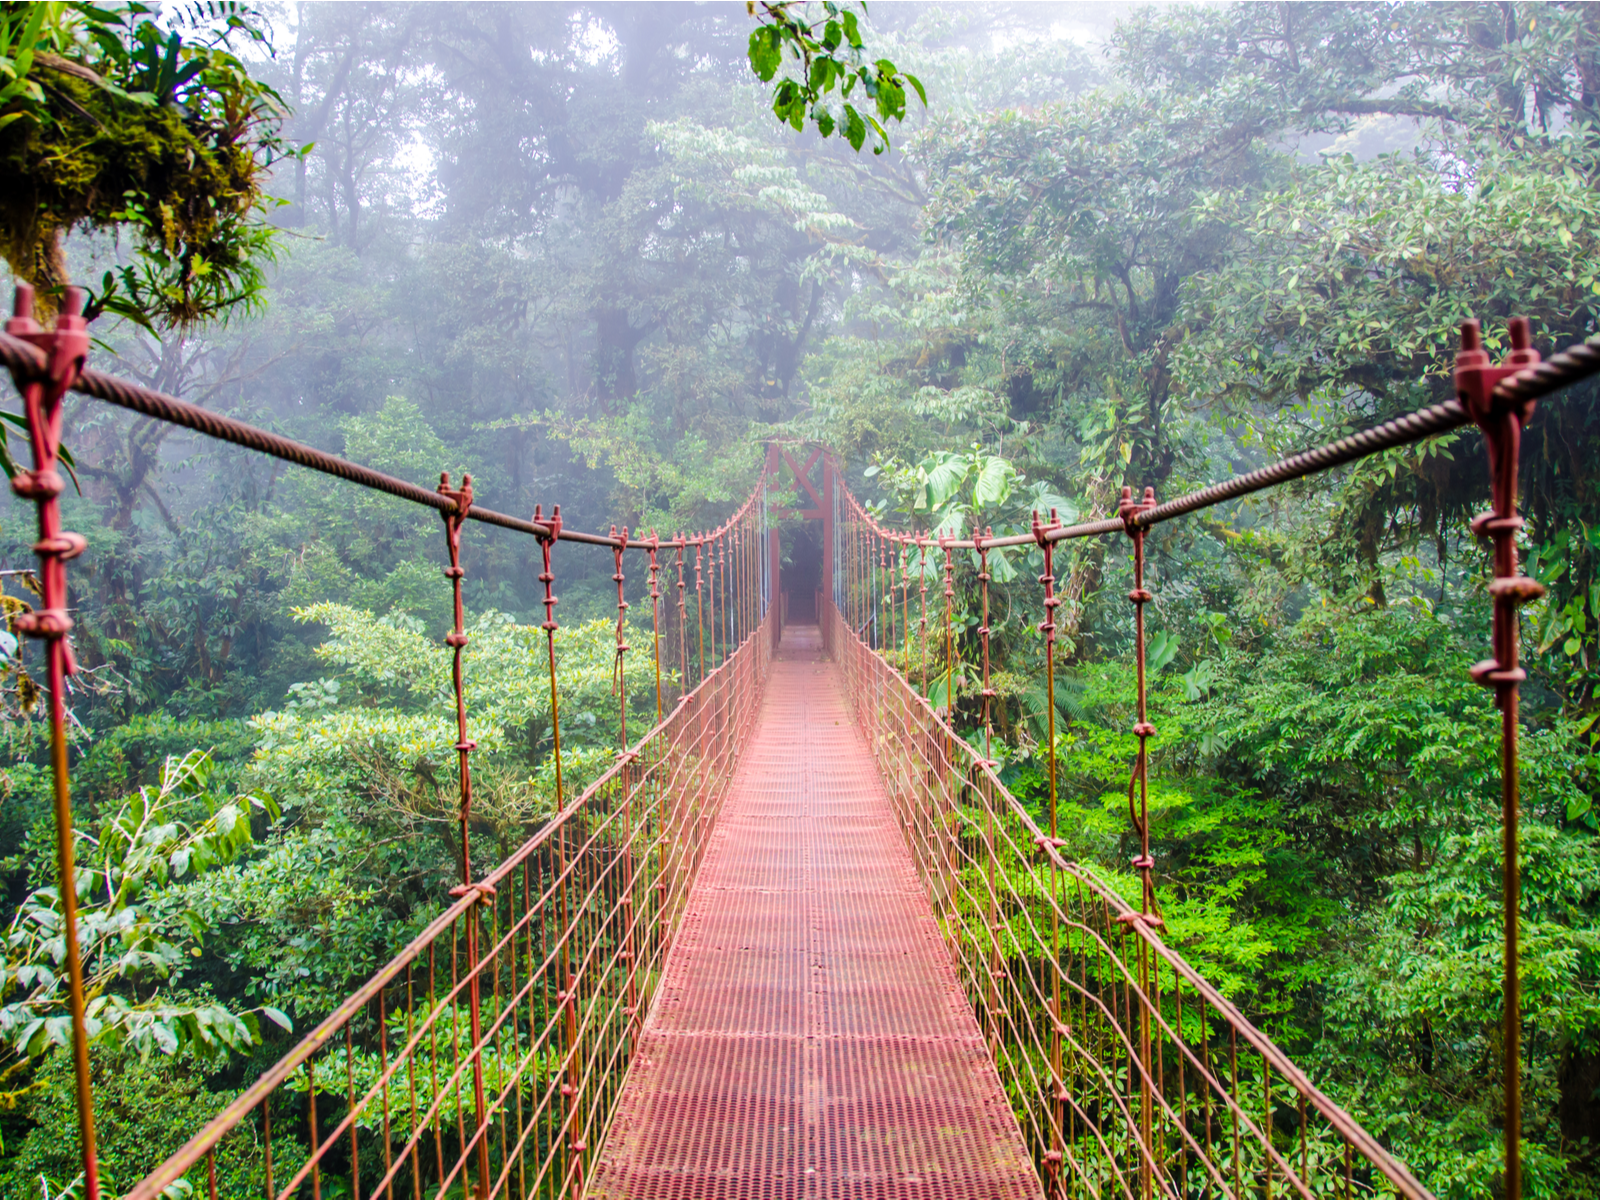 Monteverde rainforest bridge, one of the best places to visit in Costa Rica, pictured on a foggy day